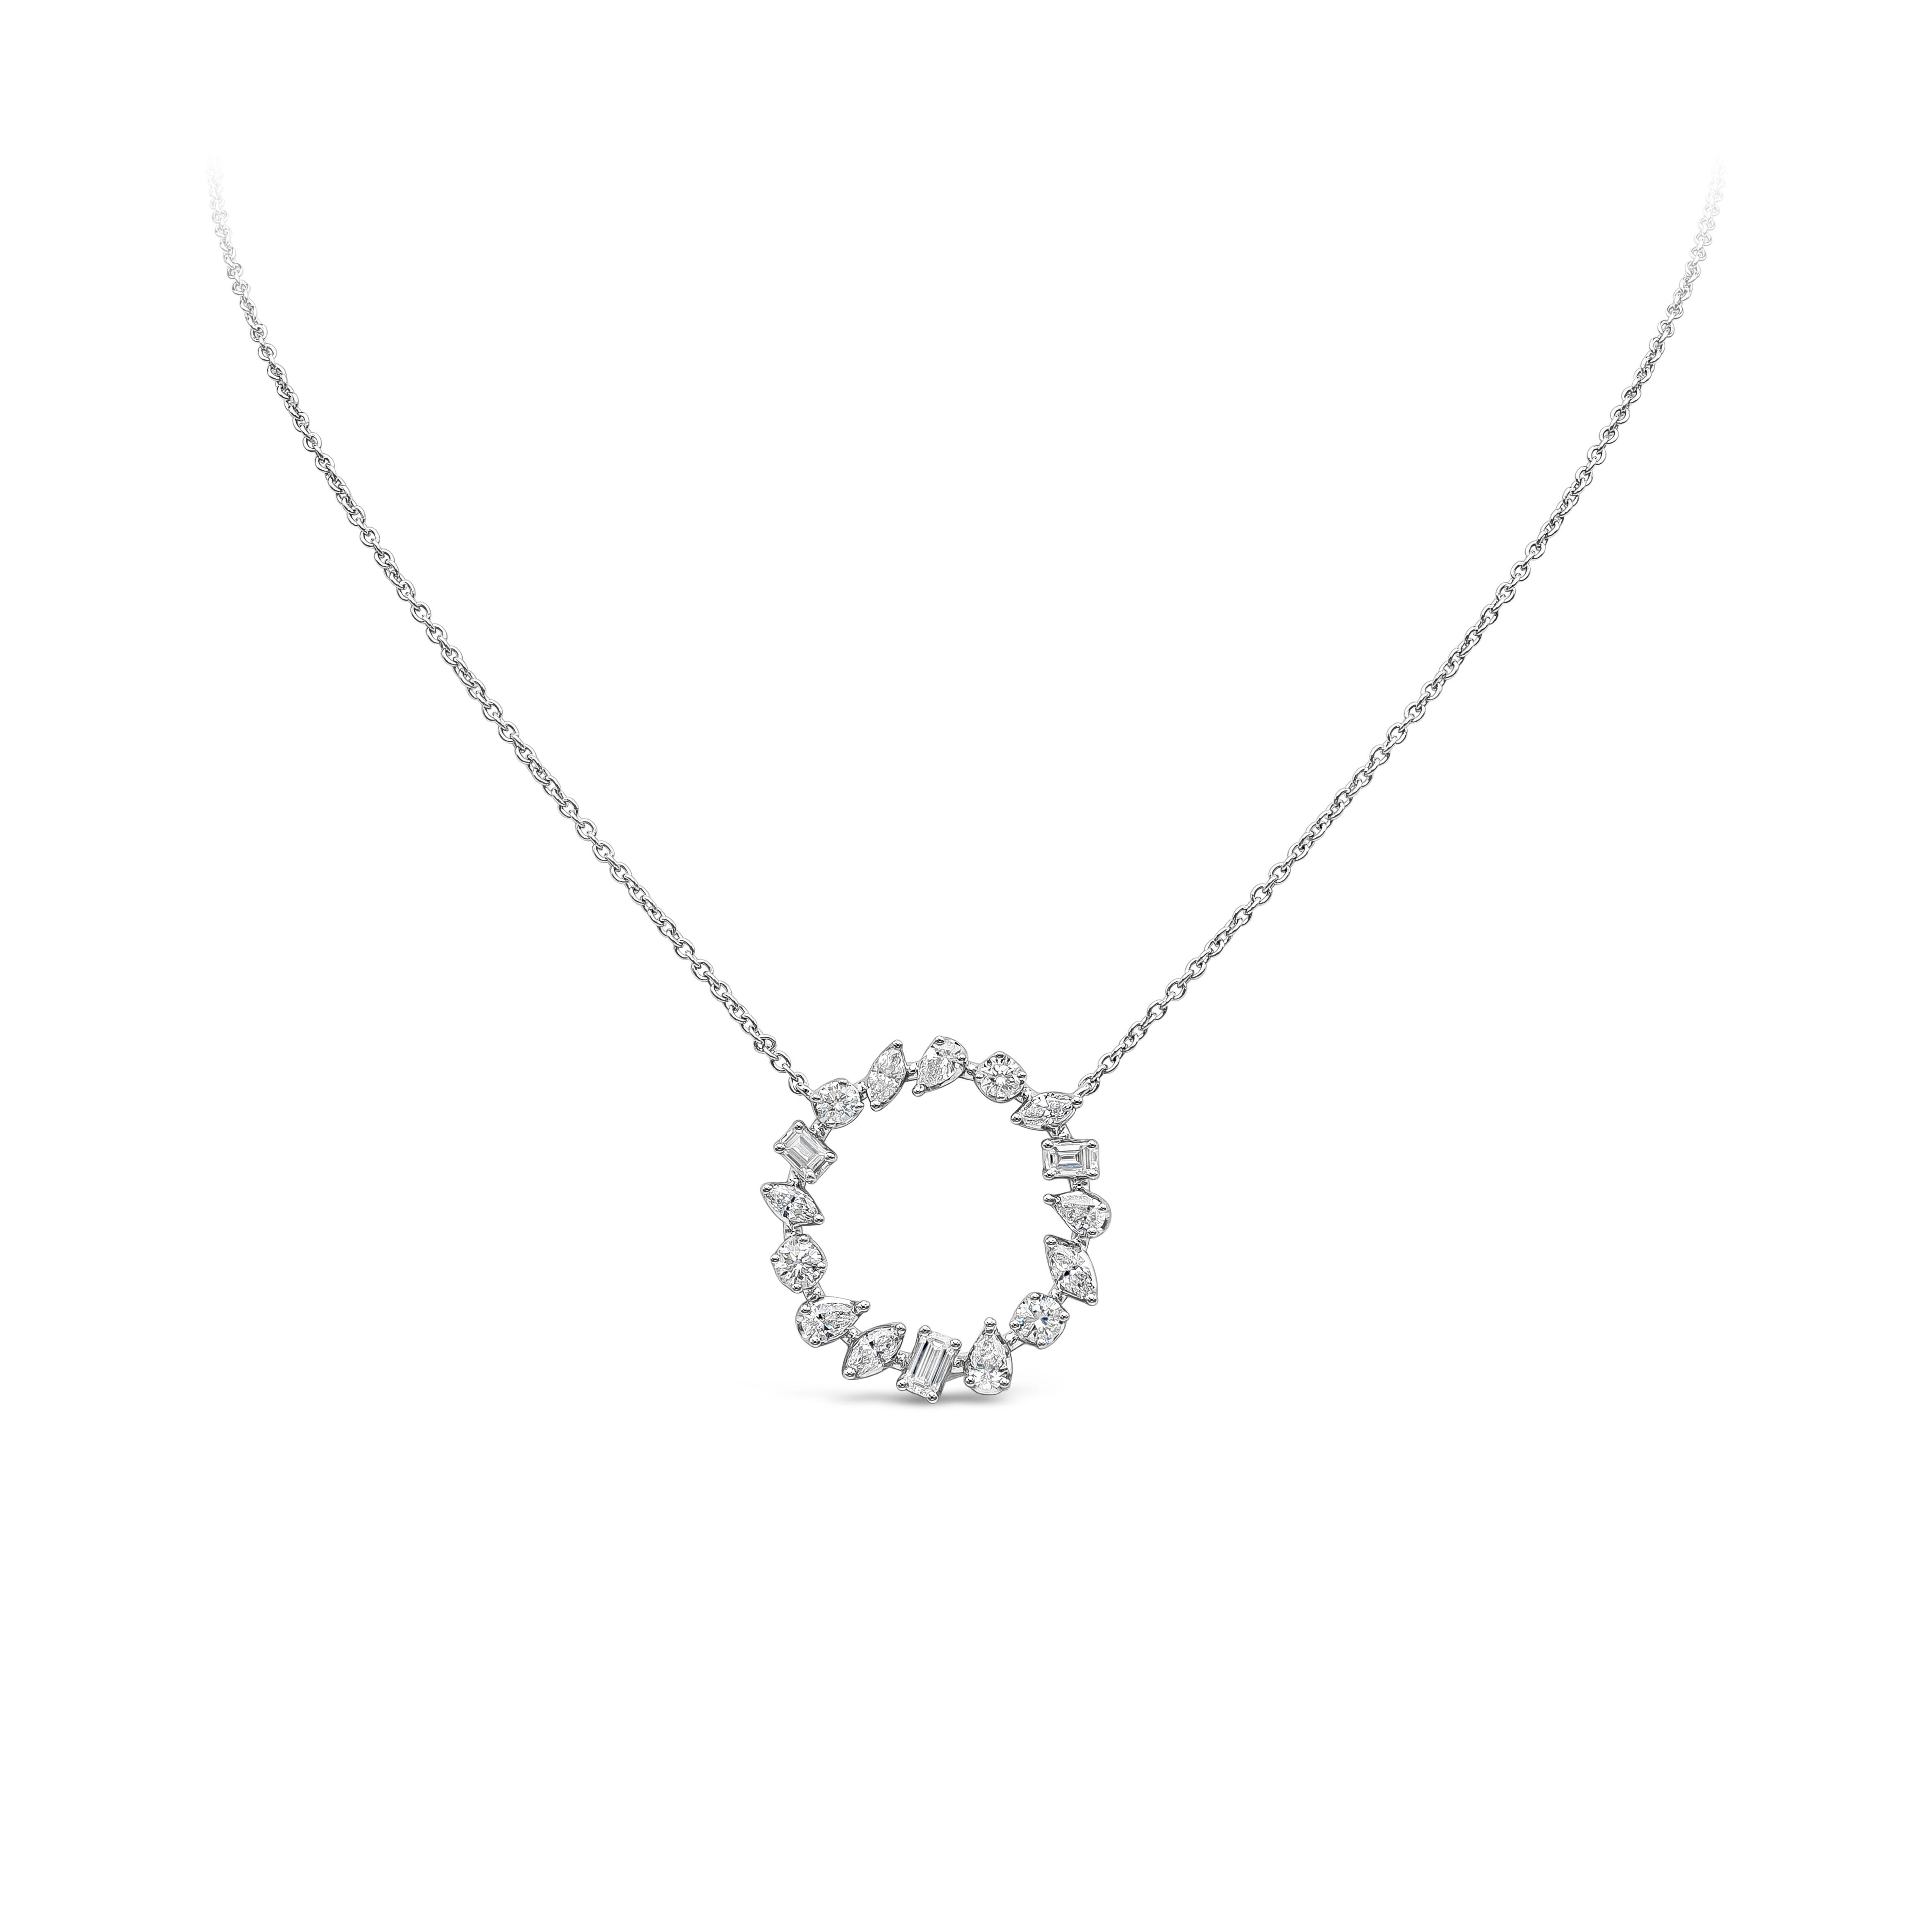 A stylish pendant necklace showcasing a row of different shape diamonds,  set in an open-work, circular design. Diamonds weigh 1.60 carats total and are approximately F-G color, VS-SI clarity. Made in 18k white gold.

Roman Malakov is a custom